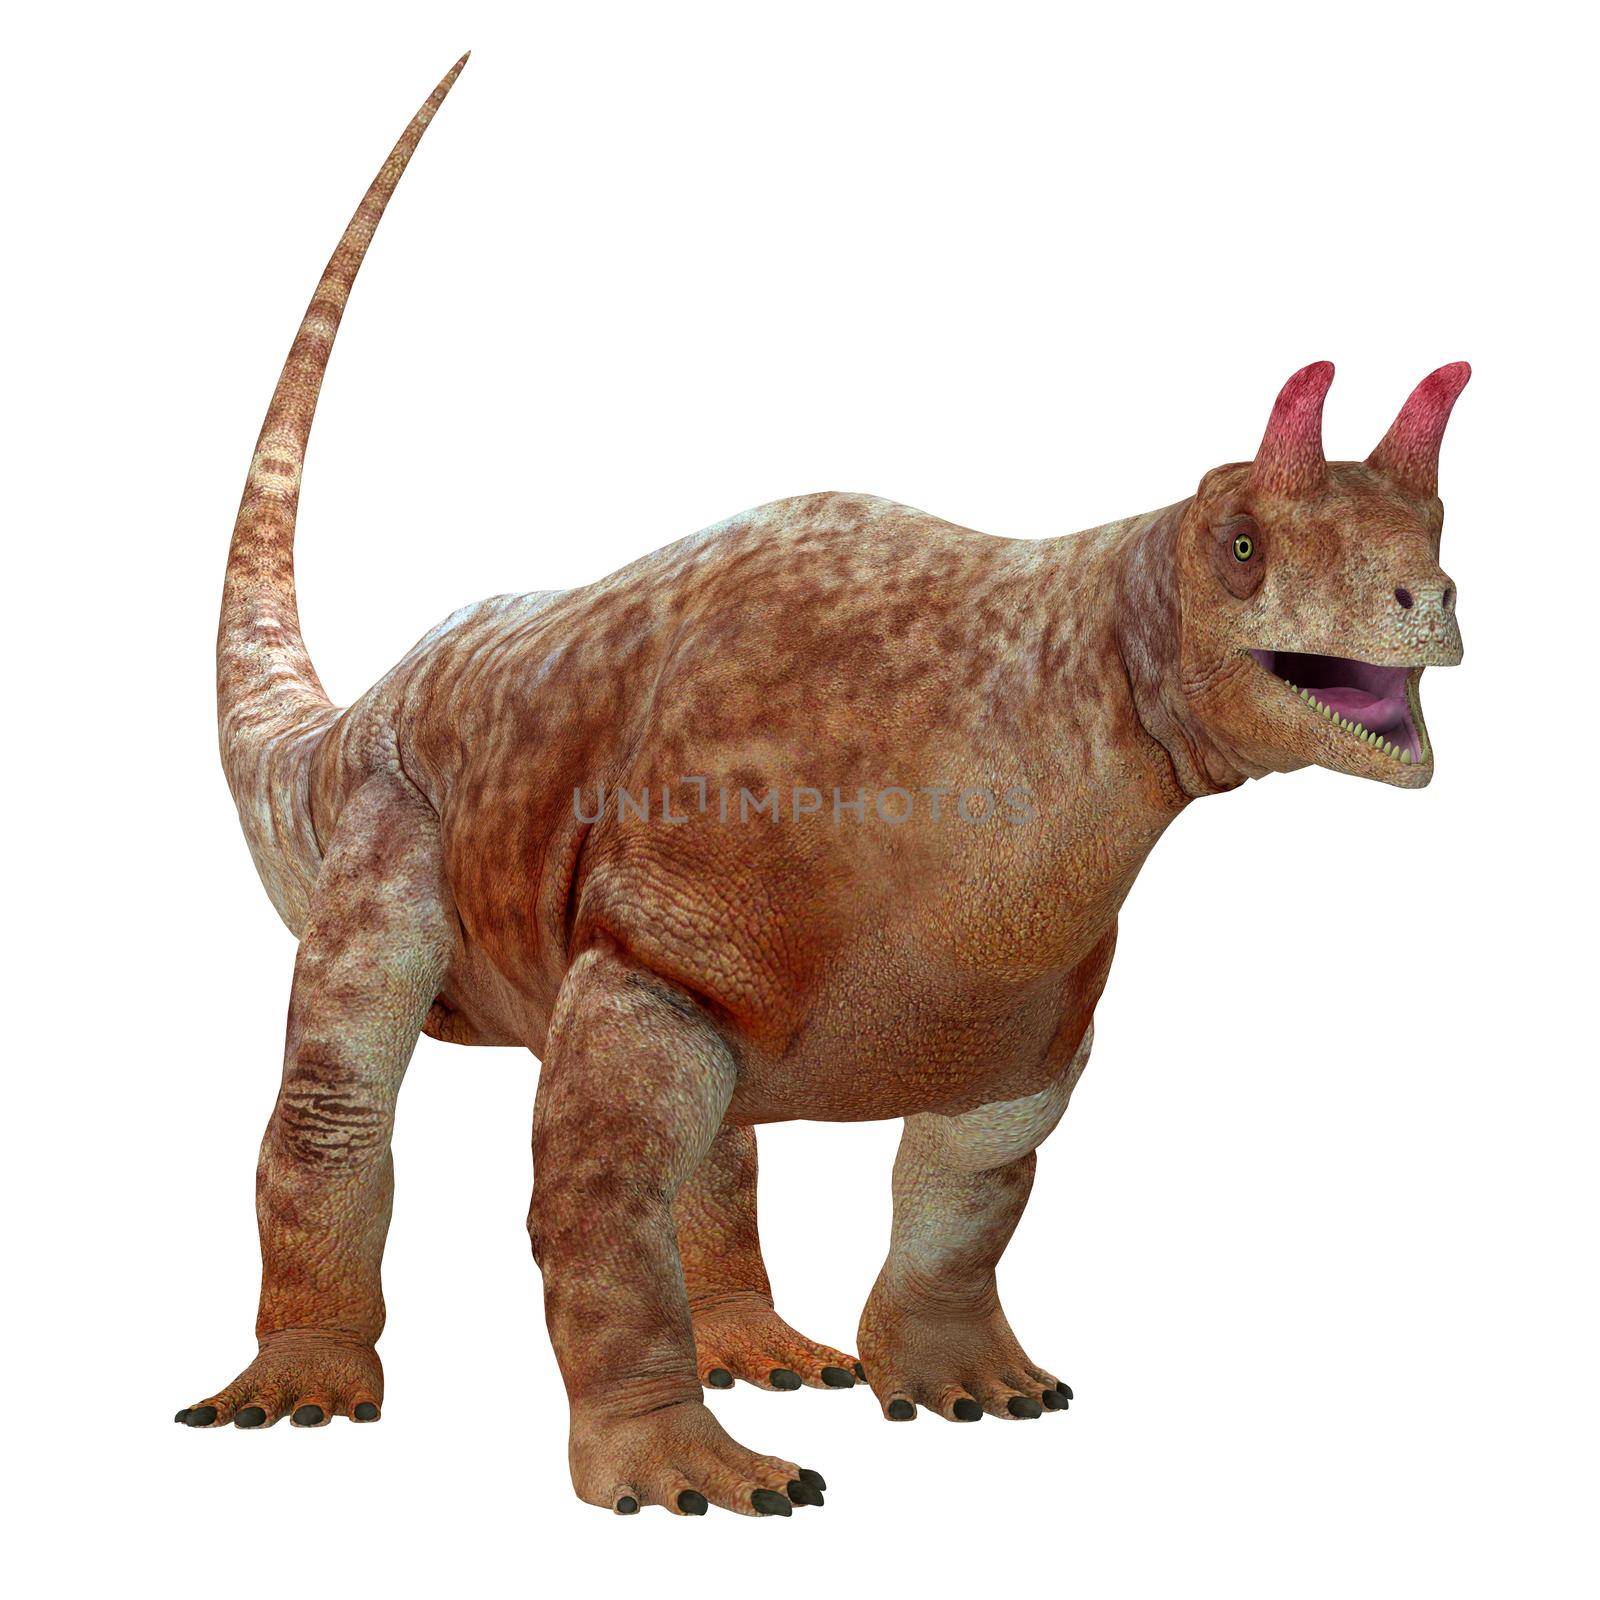 Shringasaurus was a herbivorous Archosaur that lived in India during the Triassic Period.